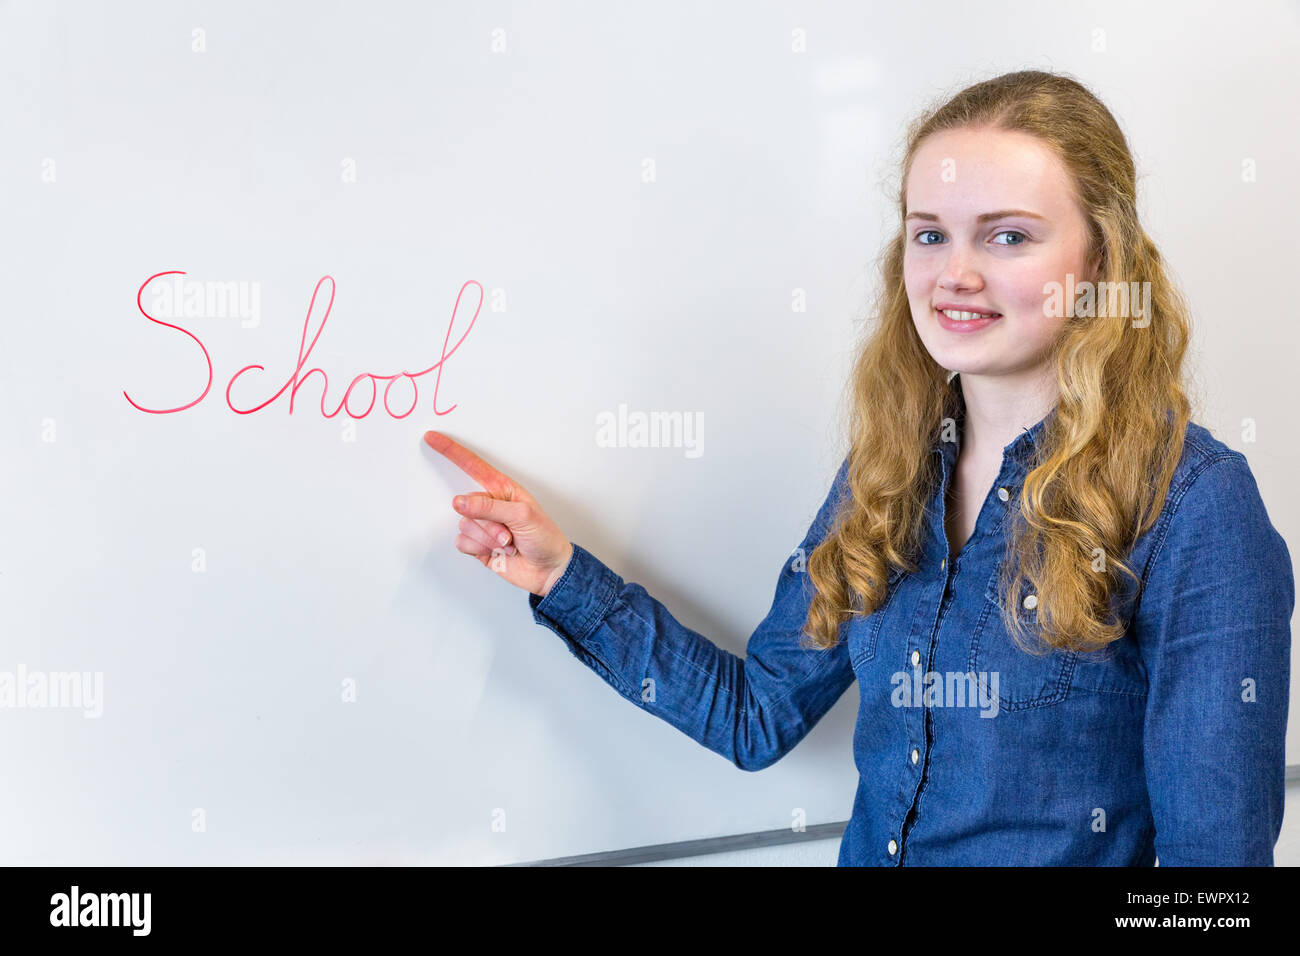 Caucasian teenage girl pointing at word School written on white board in classroom Stock Photo